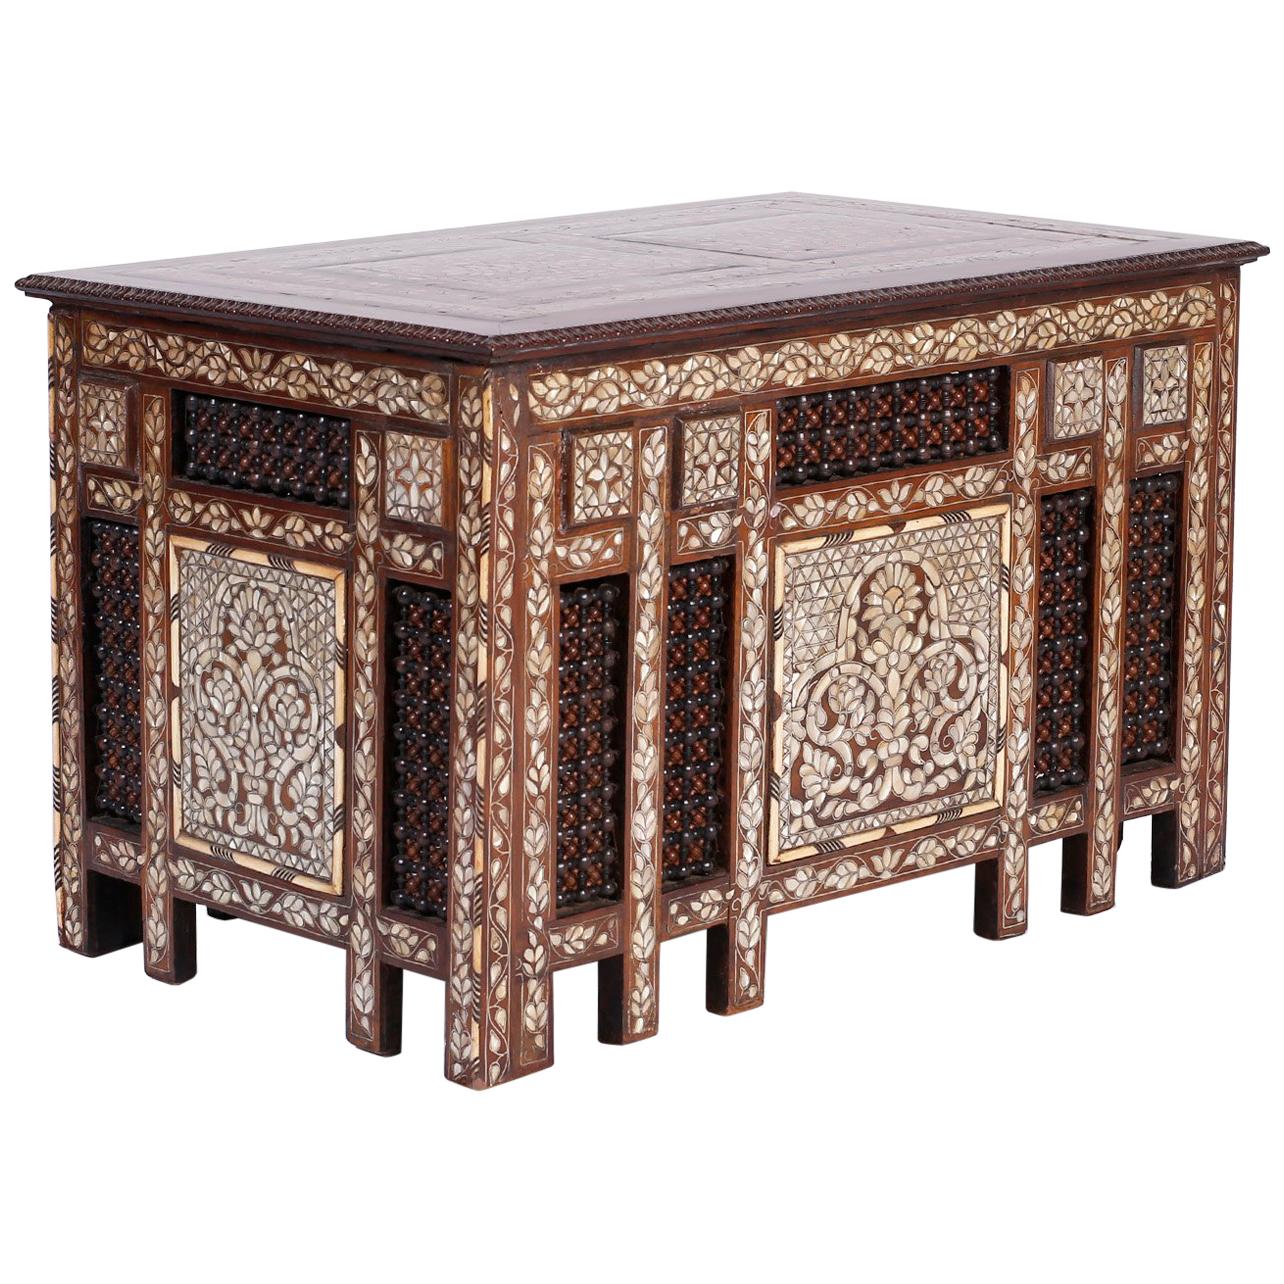 Anglo-Indian or Syrian Rectangular Inlaid Coffee Table